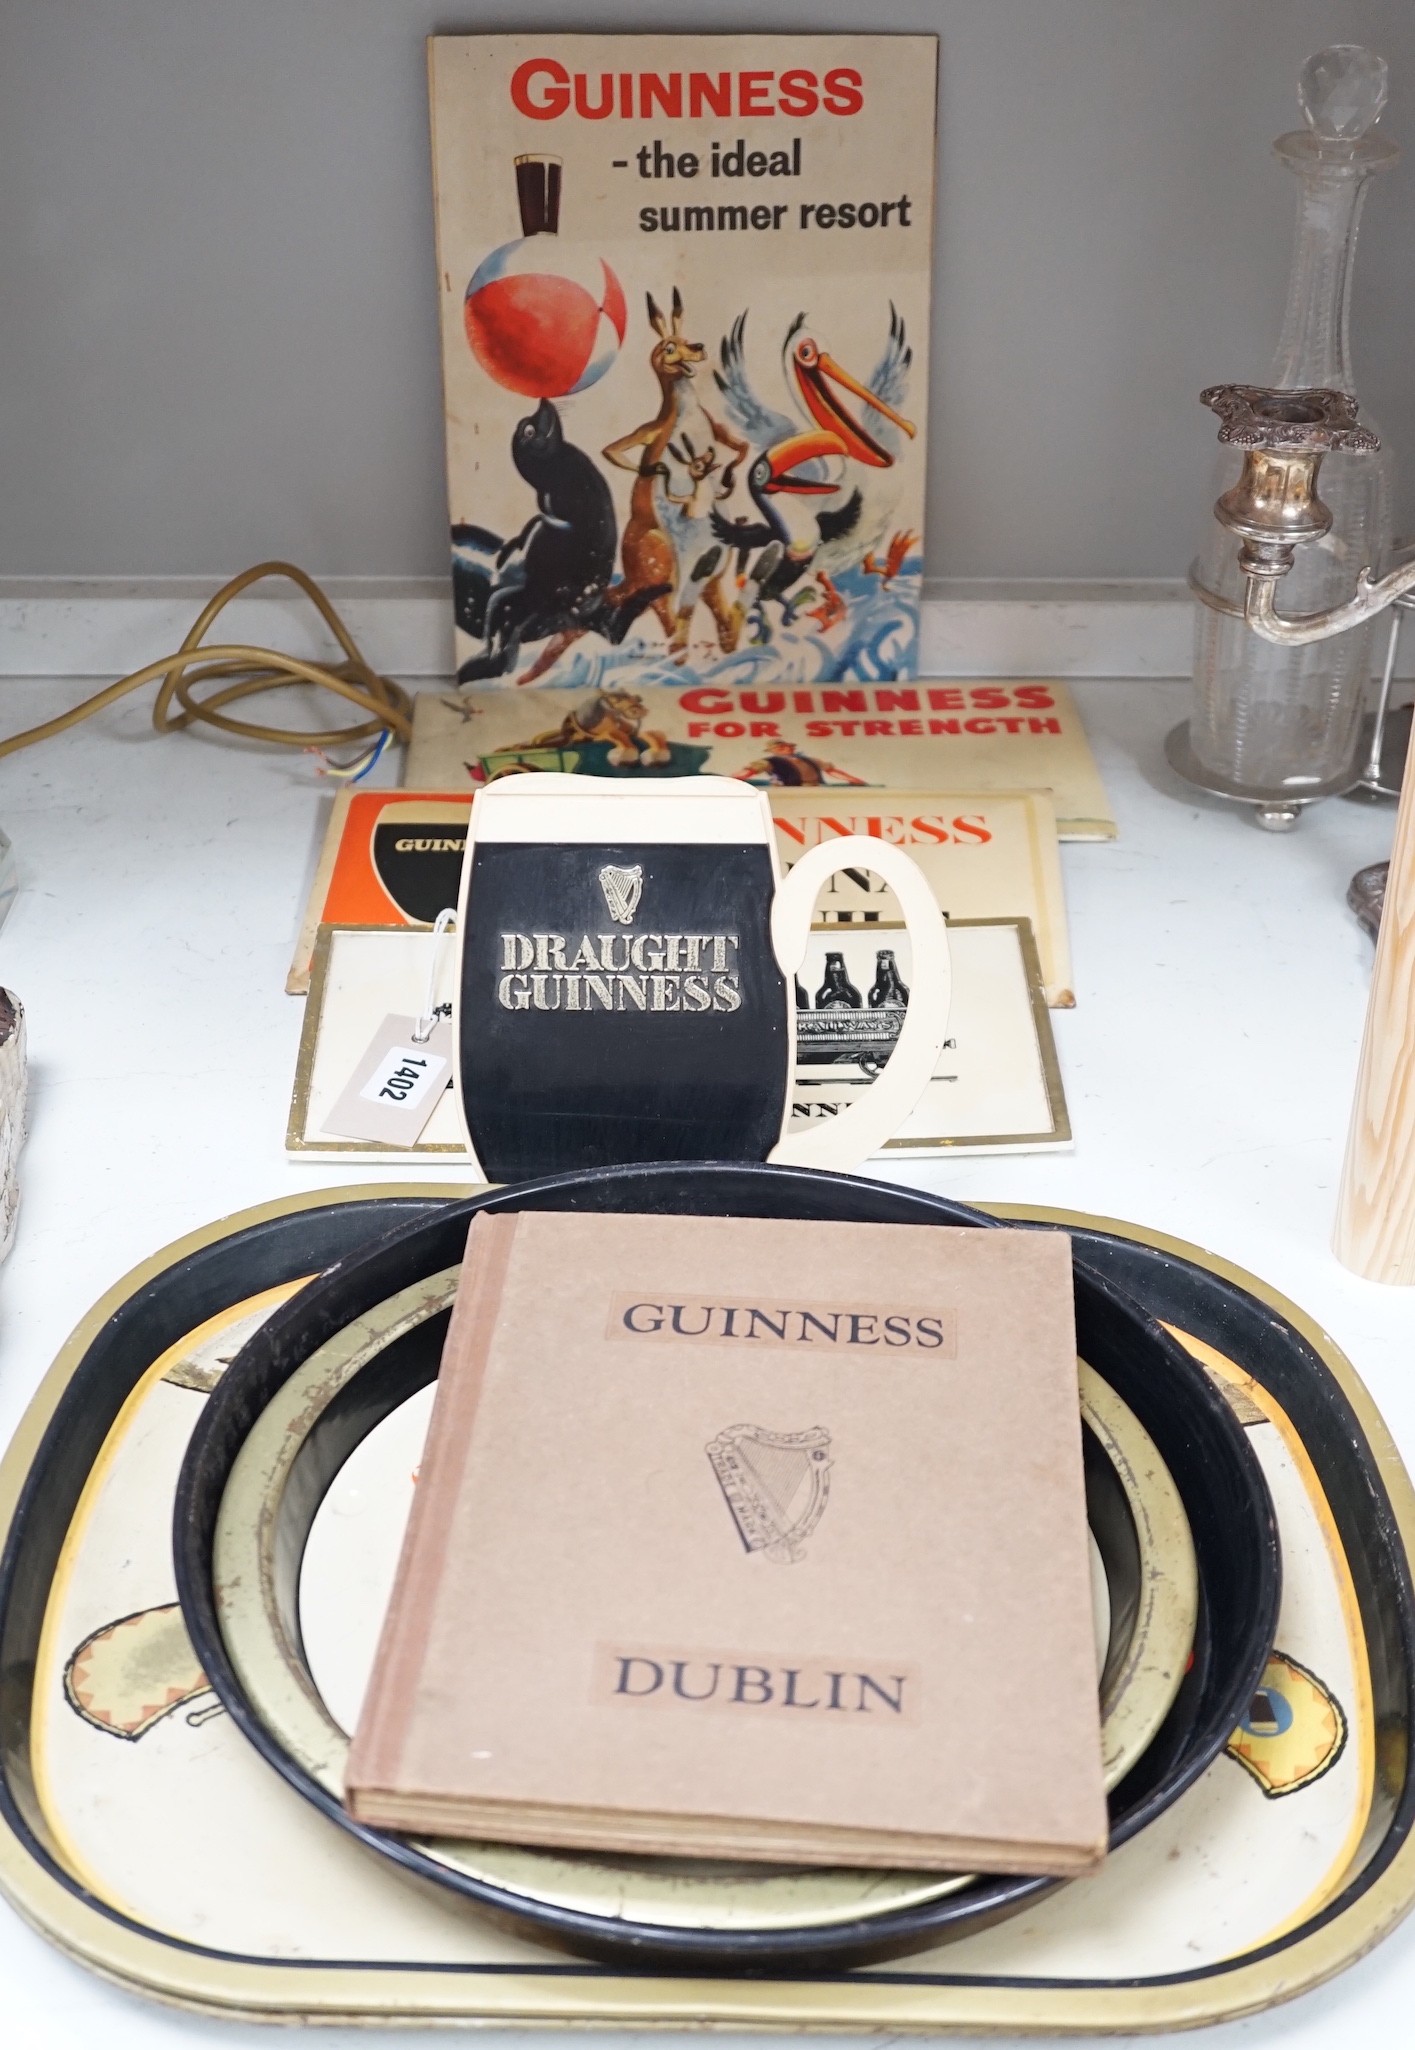 Five Guinness advertising signs, mirror, trays and a book - St. James’s Gate Brewery History and